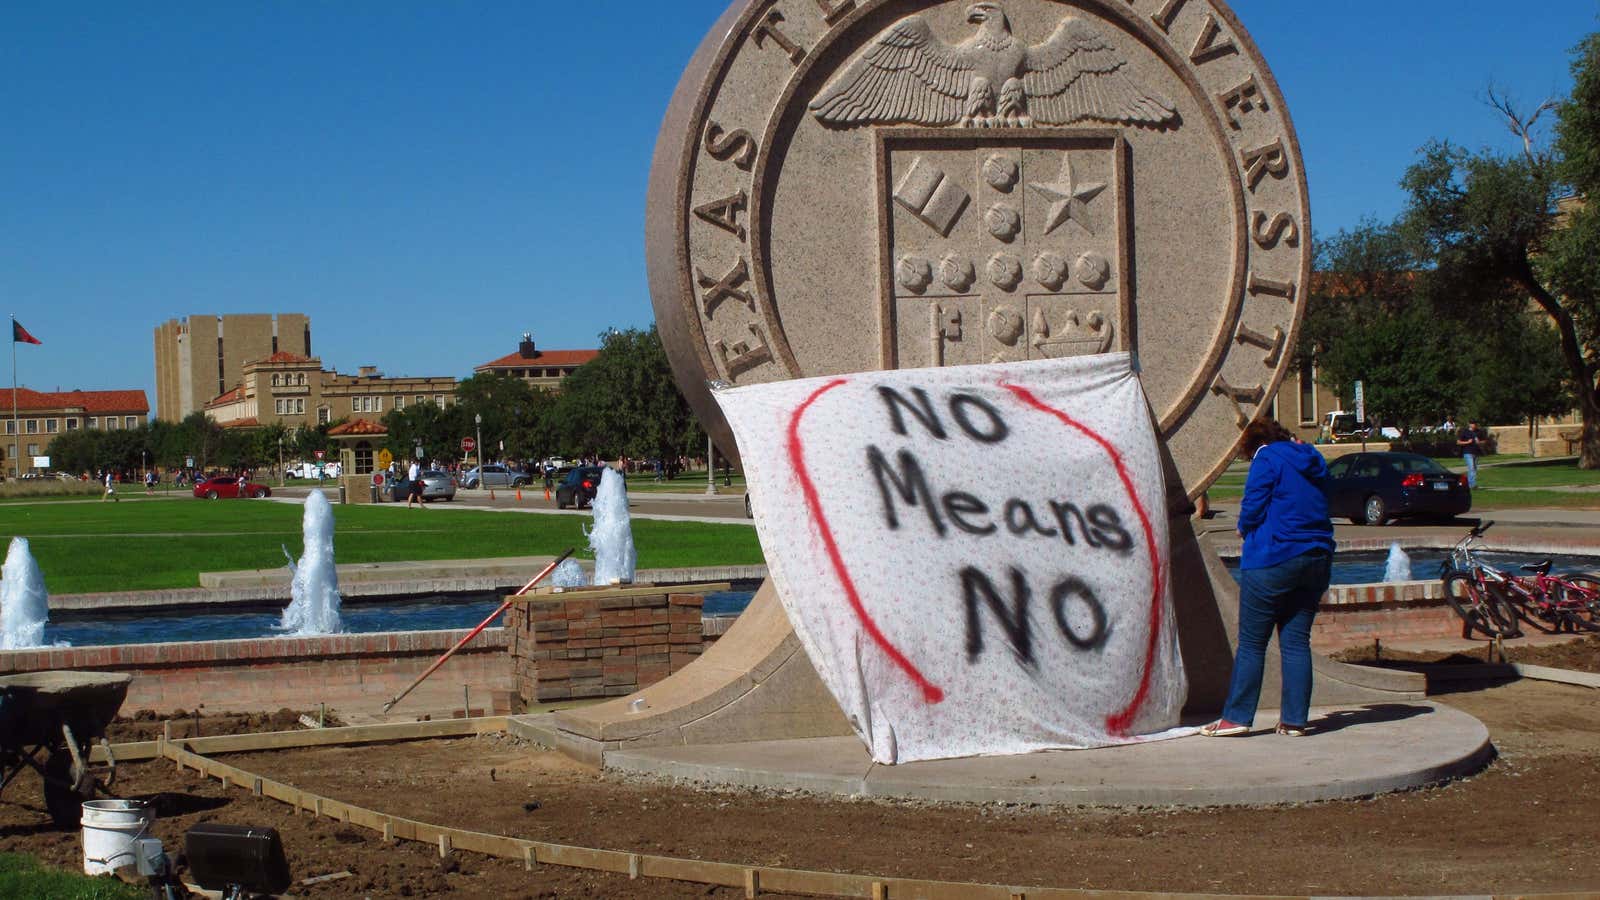 A response to a fraternity in Texas that made a banner saying “No means yes, yes means anal.”